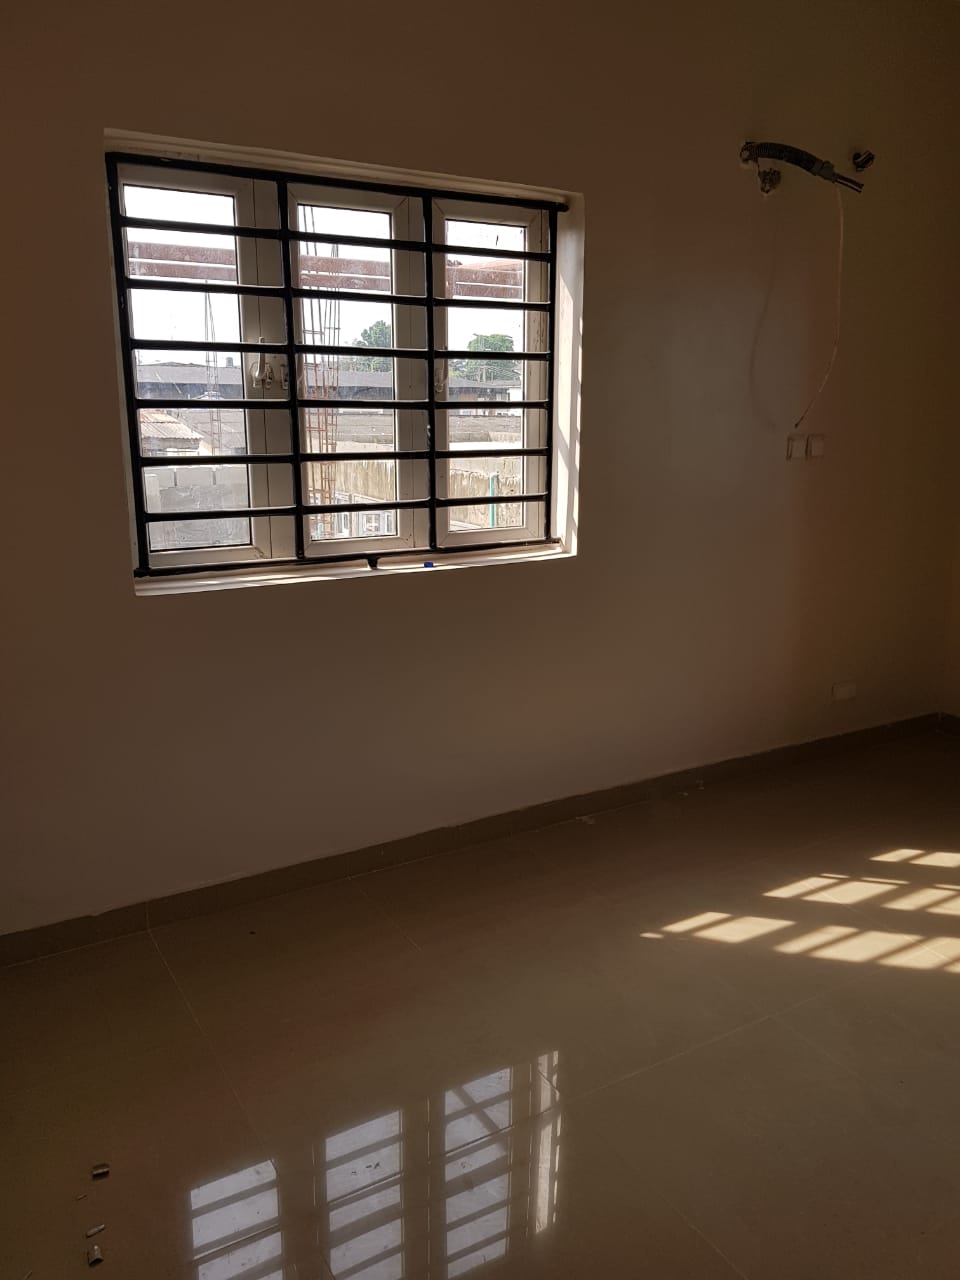 Top Notched BRAND NEW Very SPACIOUS 3 BEDROOM FLAT Apartment